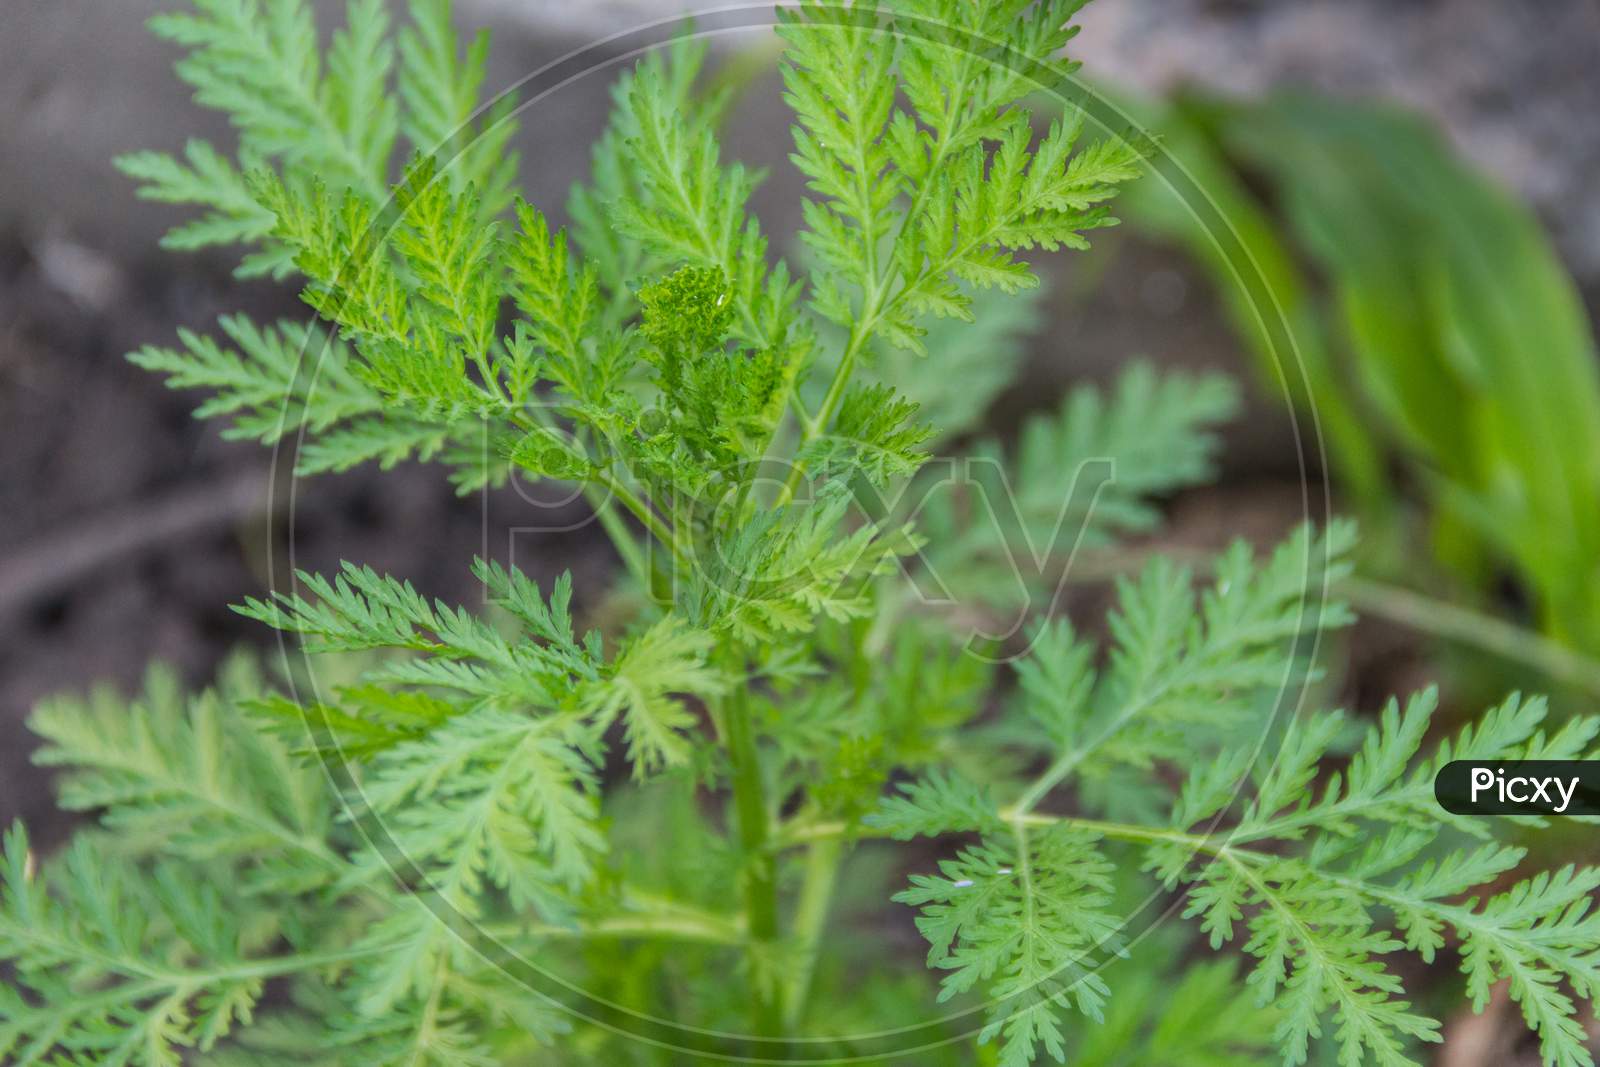 Leaves And Branches Of Mugwort Annua Or Sweet Wormwood That Grows Wild In The Argentine Mountains And Is Used For Alternative Medicine